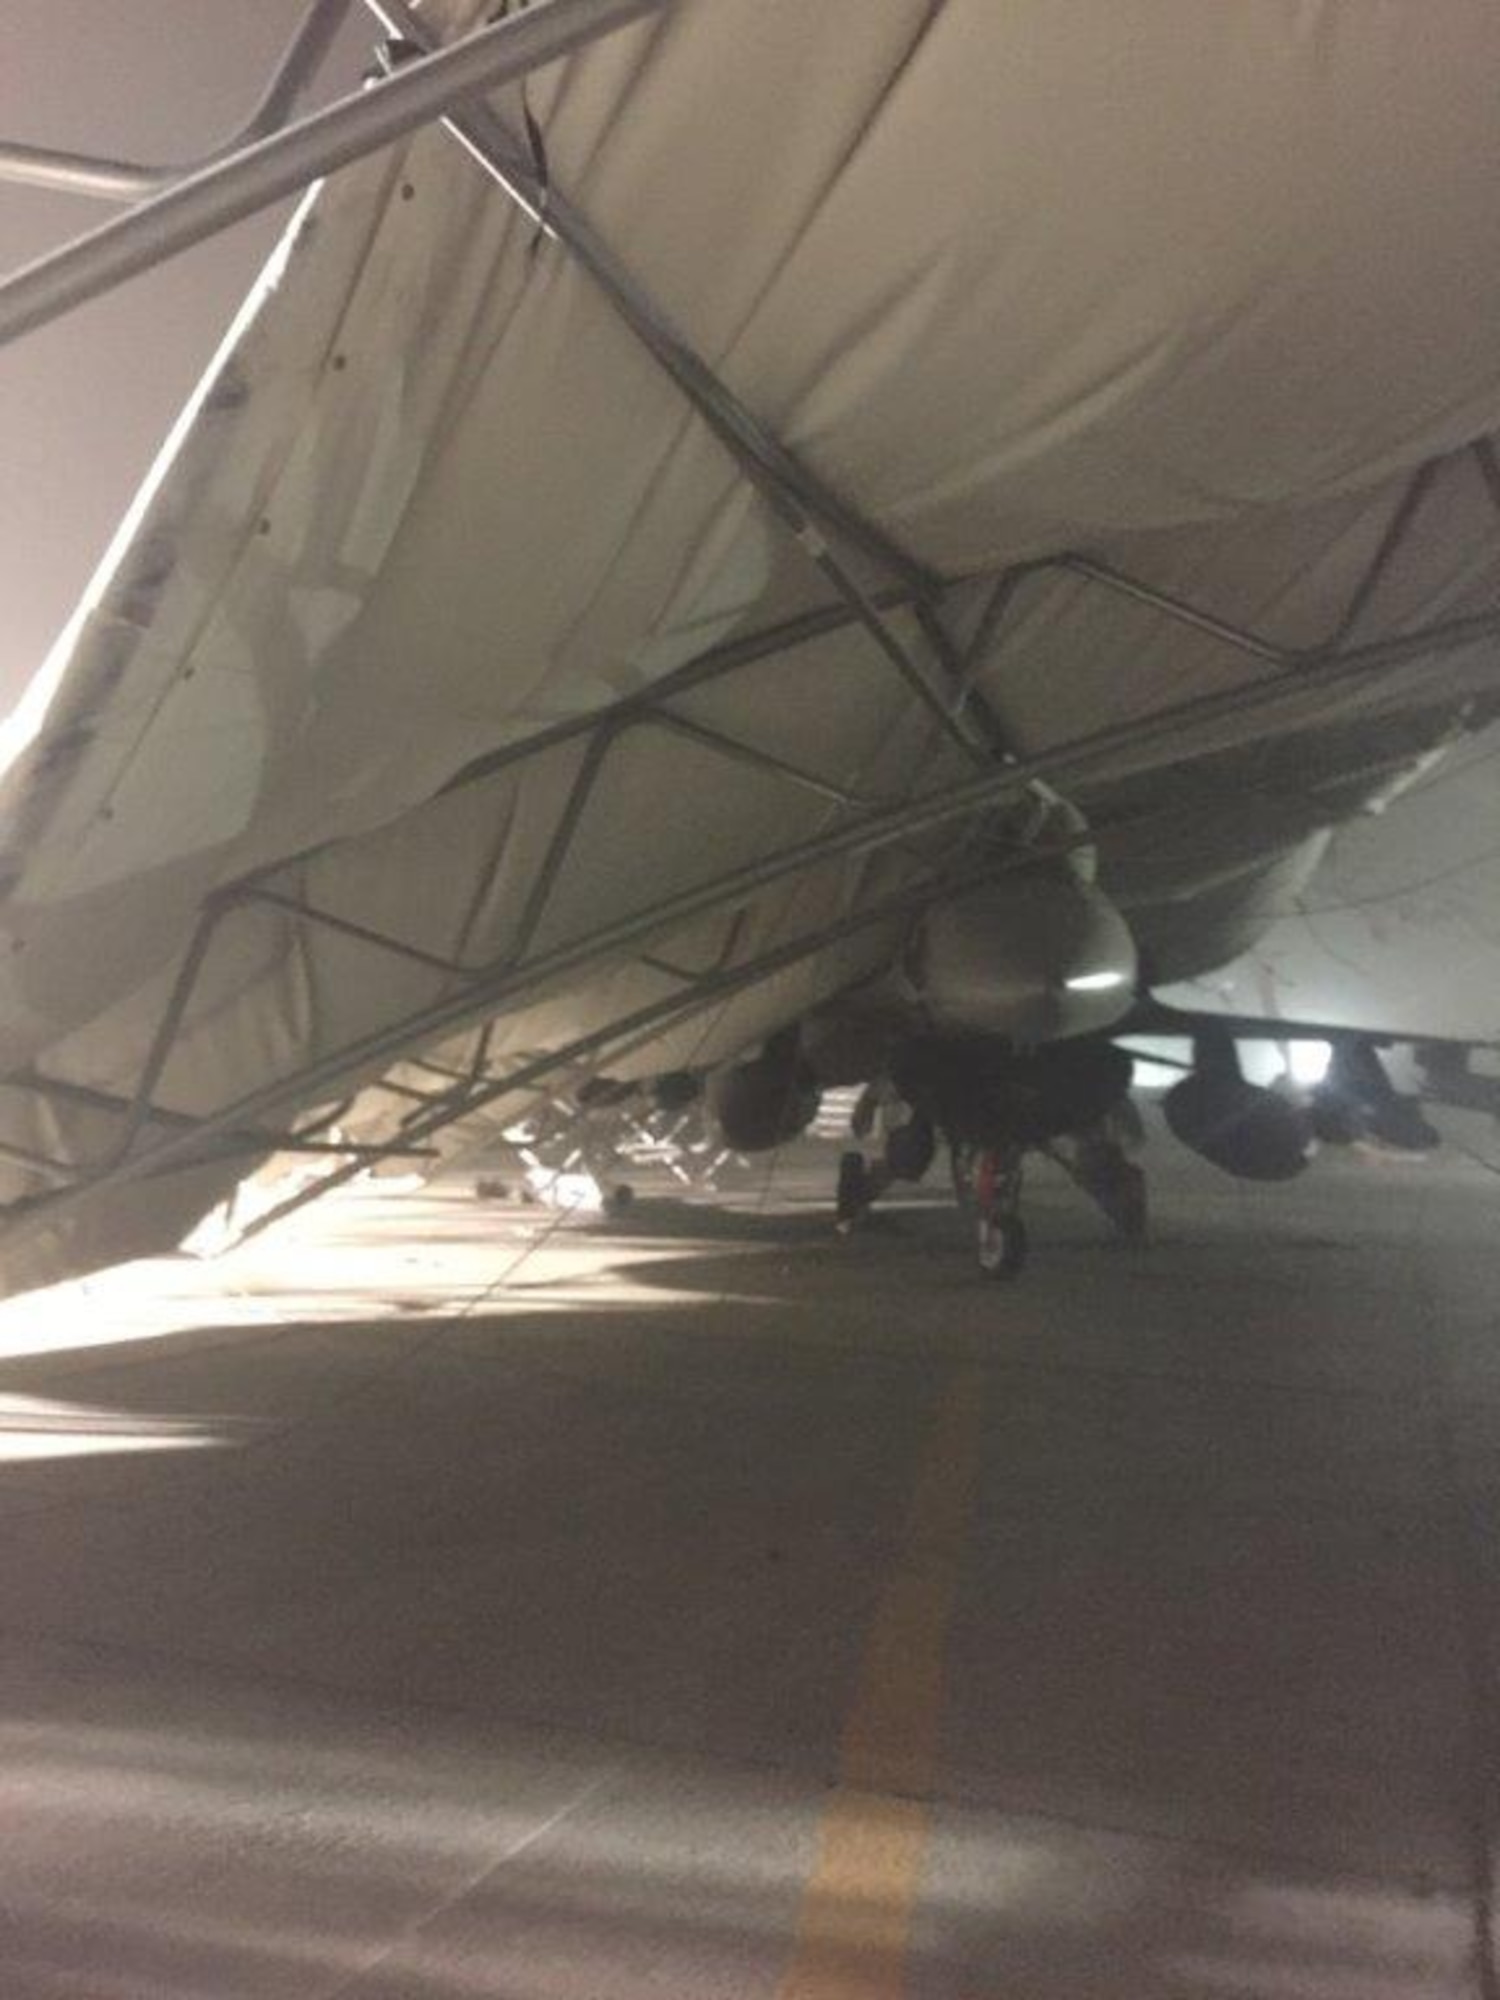 An aircraft sunshade collapsed onto an F-16 Fight Falcon due to a storm with 91-mile per hour winds at the 407th Air Expeditionary Group in 2018. (U.S. Air National Guard photo by MSgt Tom Krob)